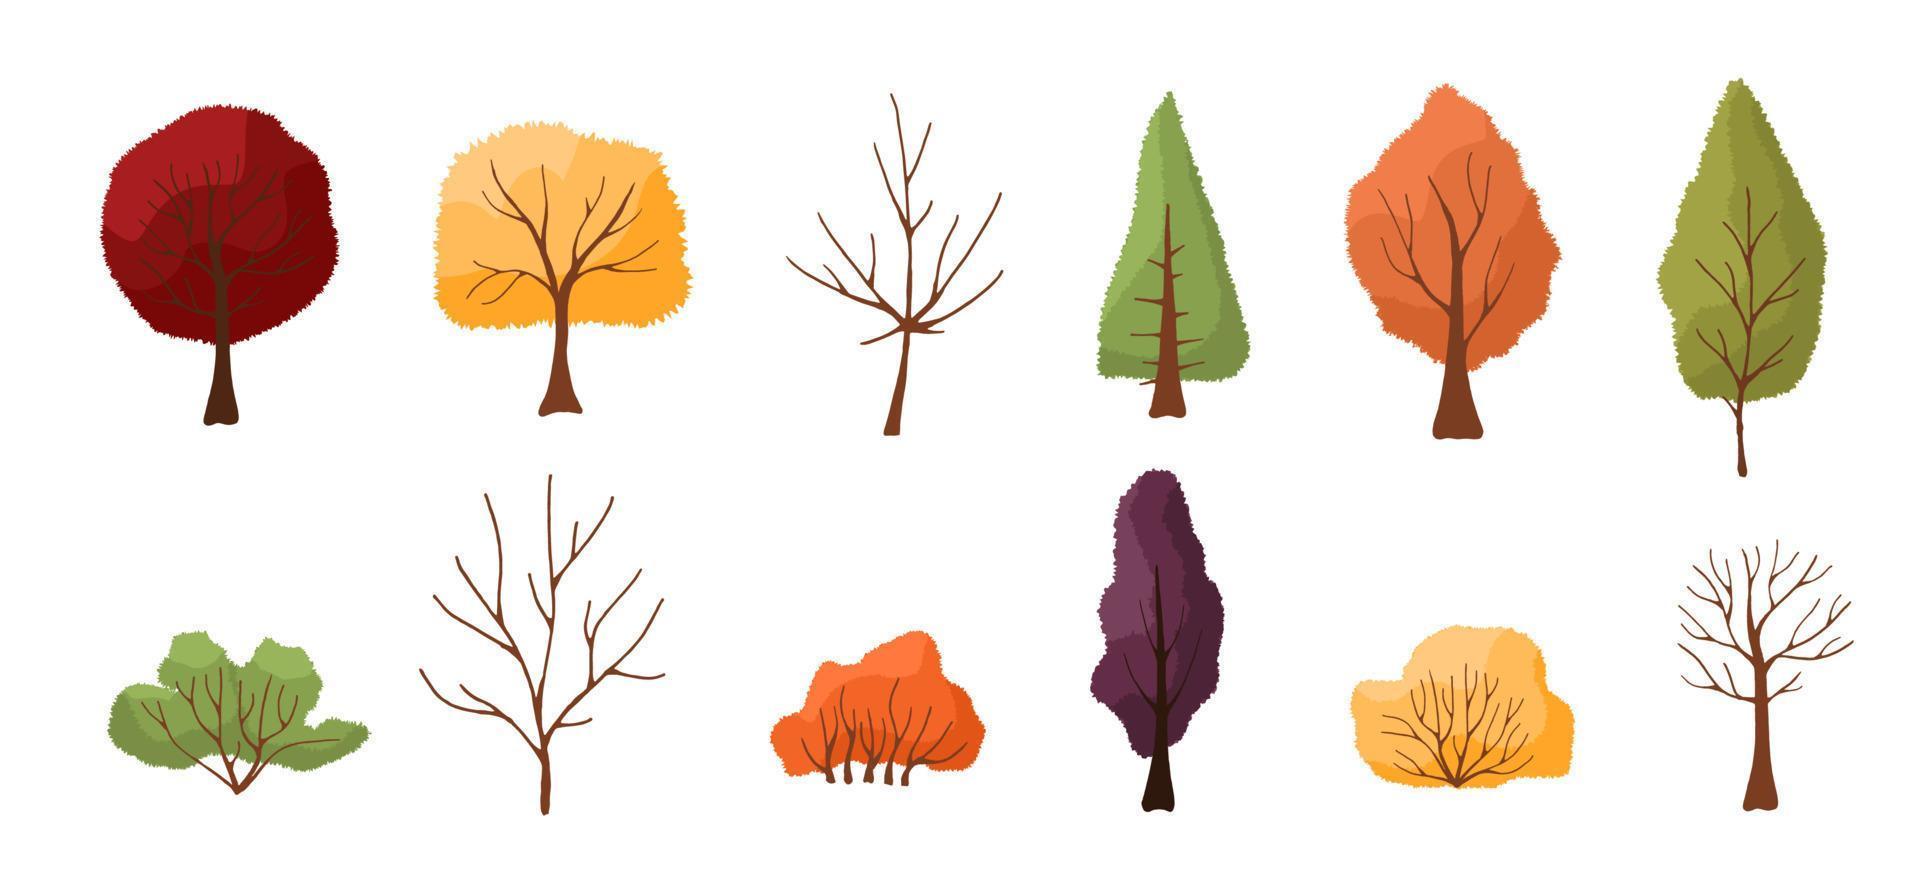 Set of colorful autumn trees and bushes. Isolated on white background. Simple design. Vector illustration in flat style.